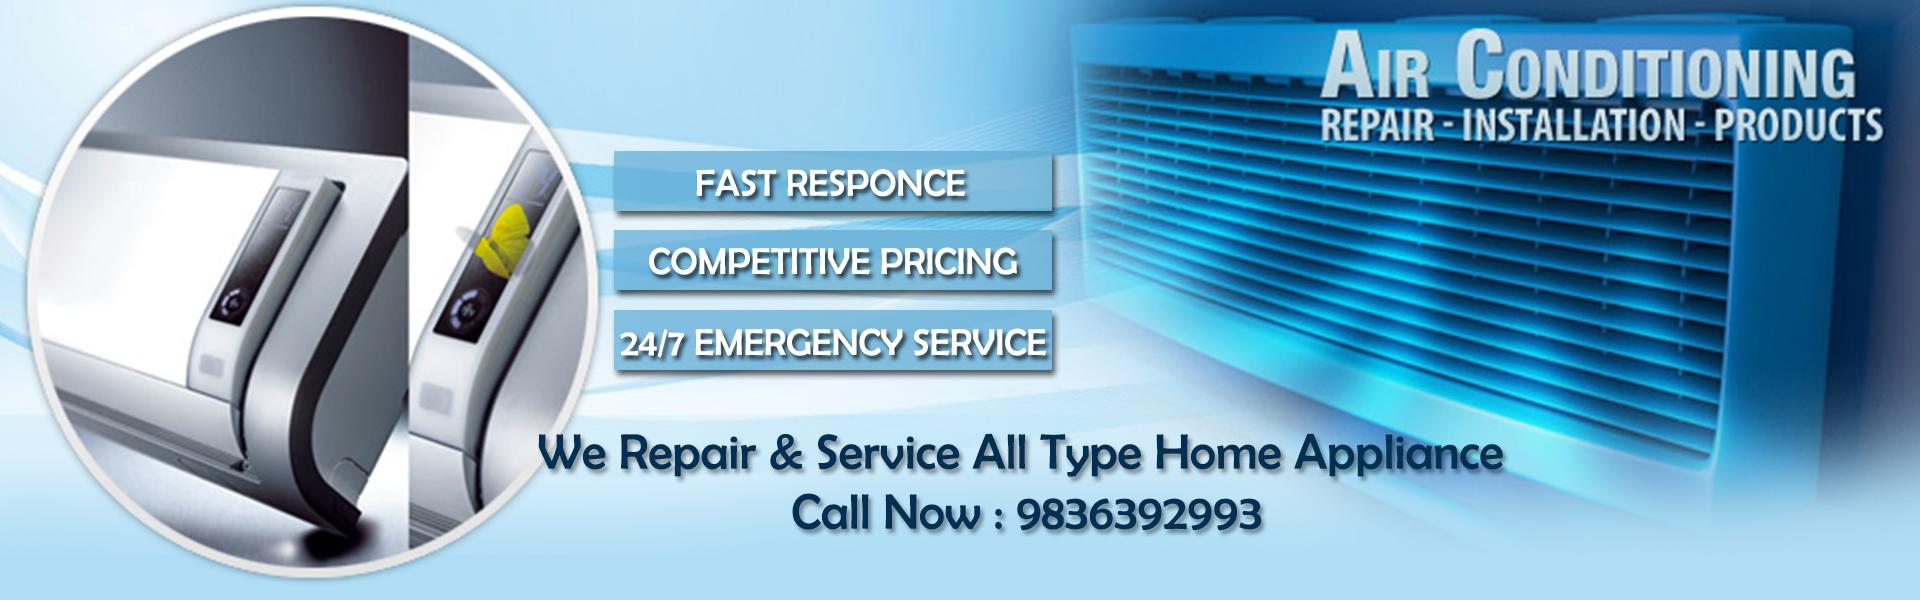 Customer Care North Ac Repair & Services Banner